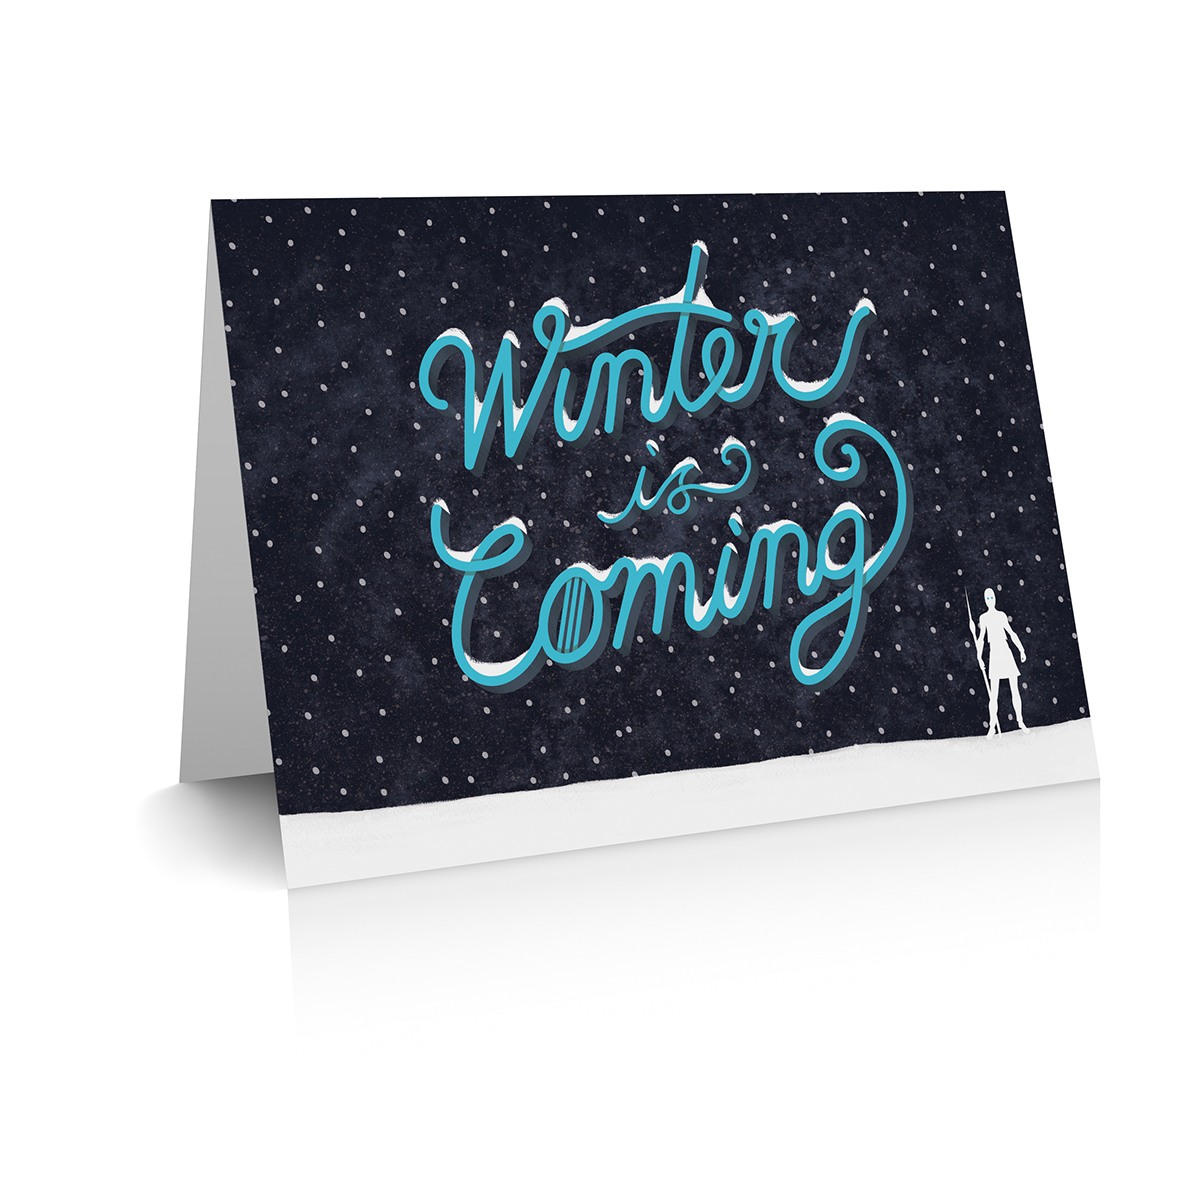 Game of Thrones winter is coming holiday card greeting card